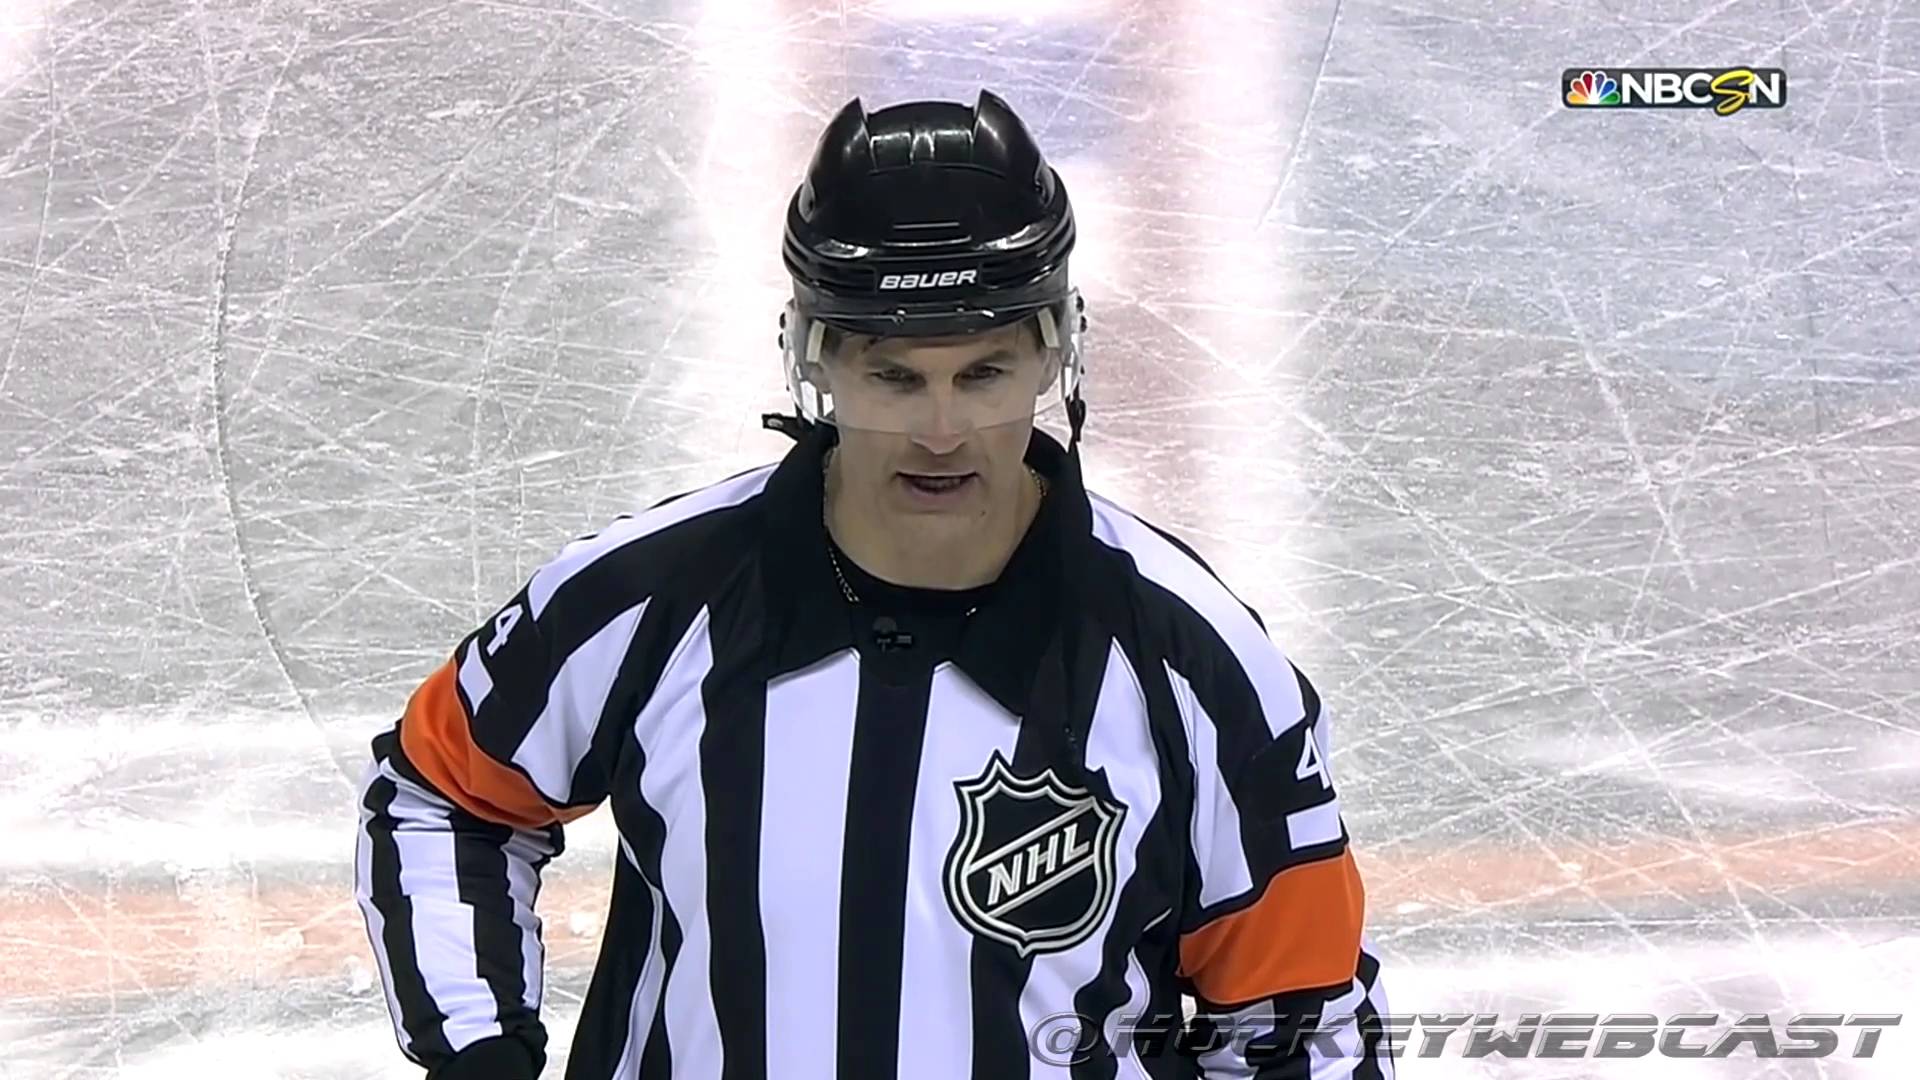 NHL referee with the most dramatic call ever